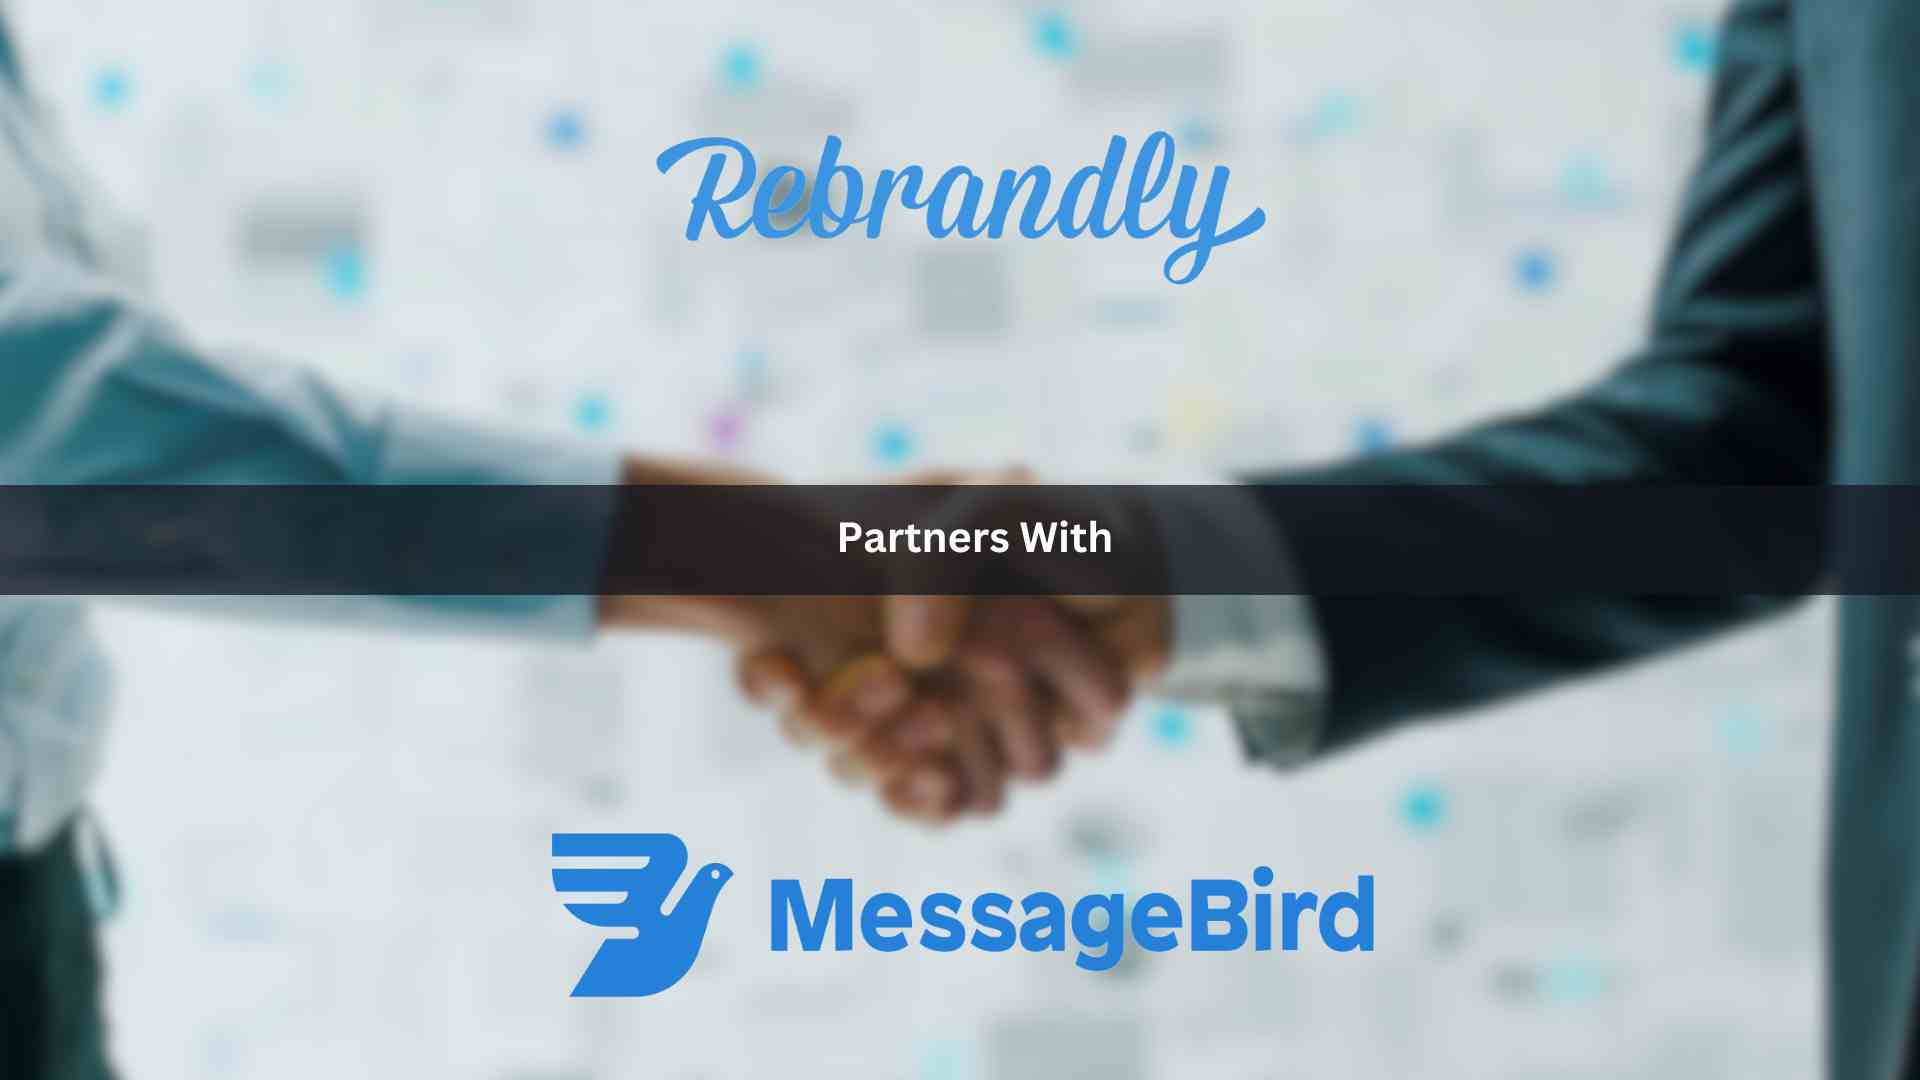 Rebrandly Partners with MessageBird -- Empowering Companies to Strengthen Their SMS, Email and WhatsApp Communications with Branded, Shortened Links